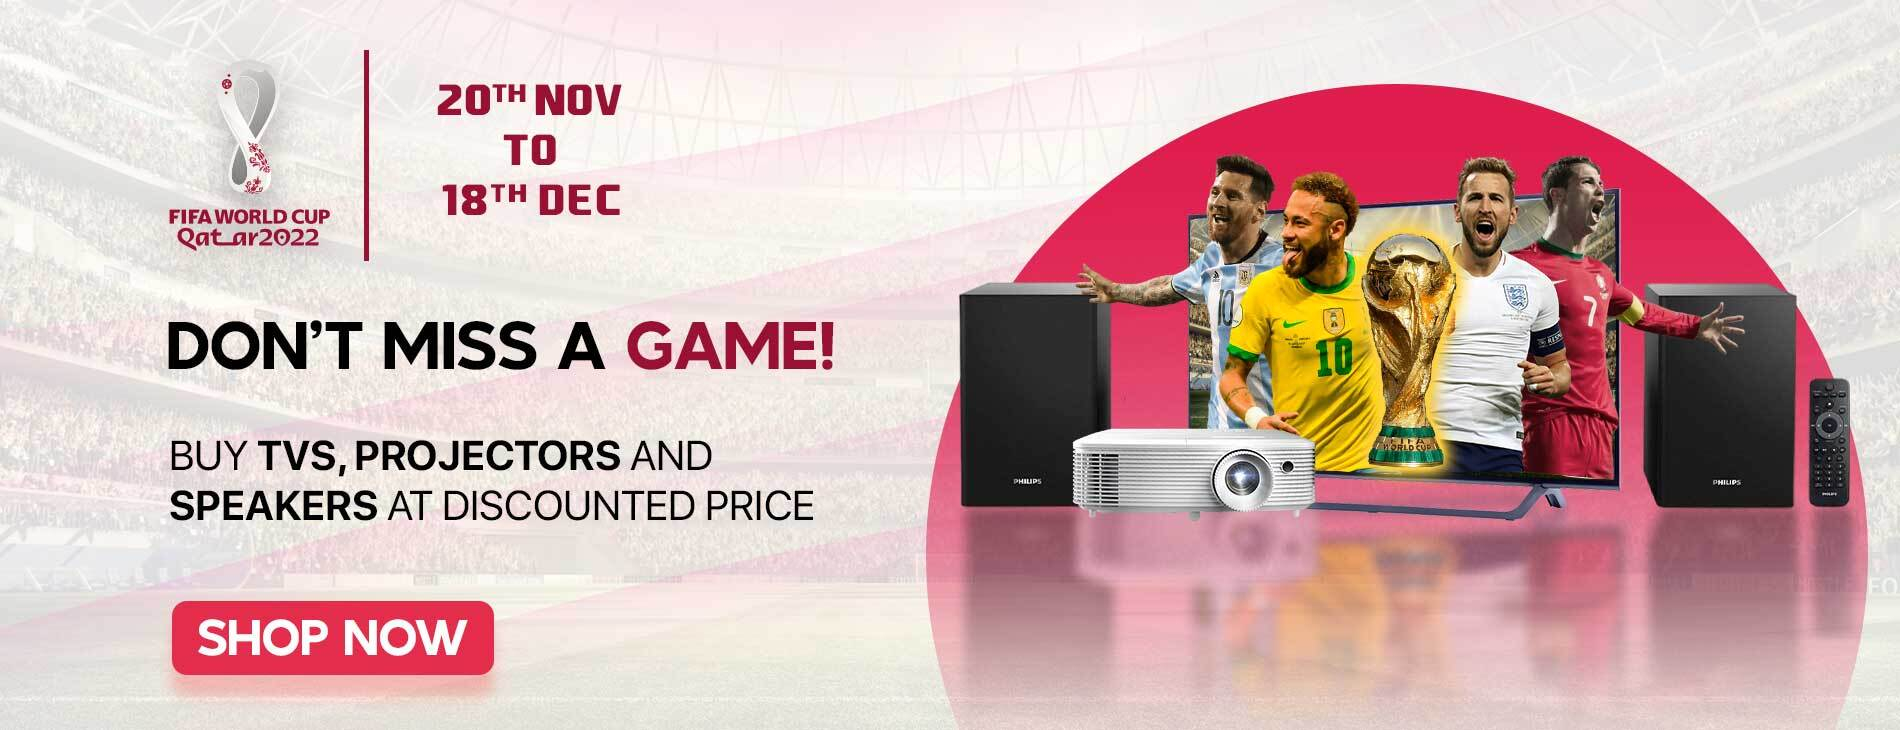 World Cup TV Offer Nepal